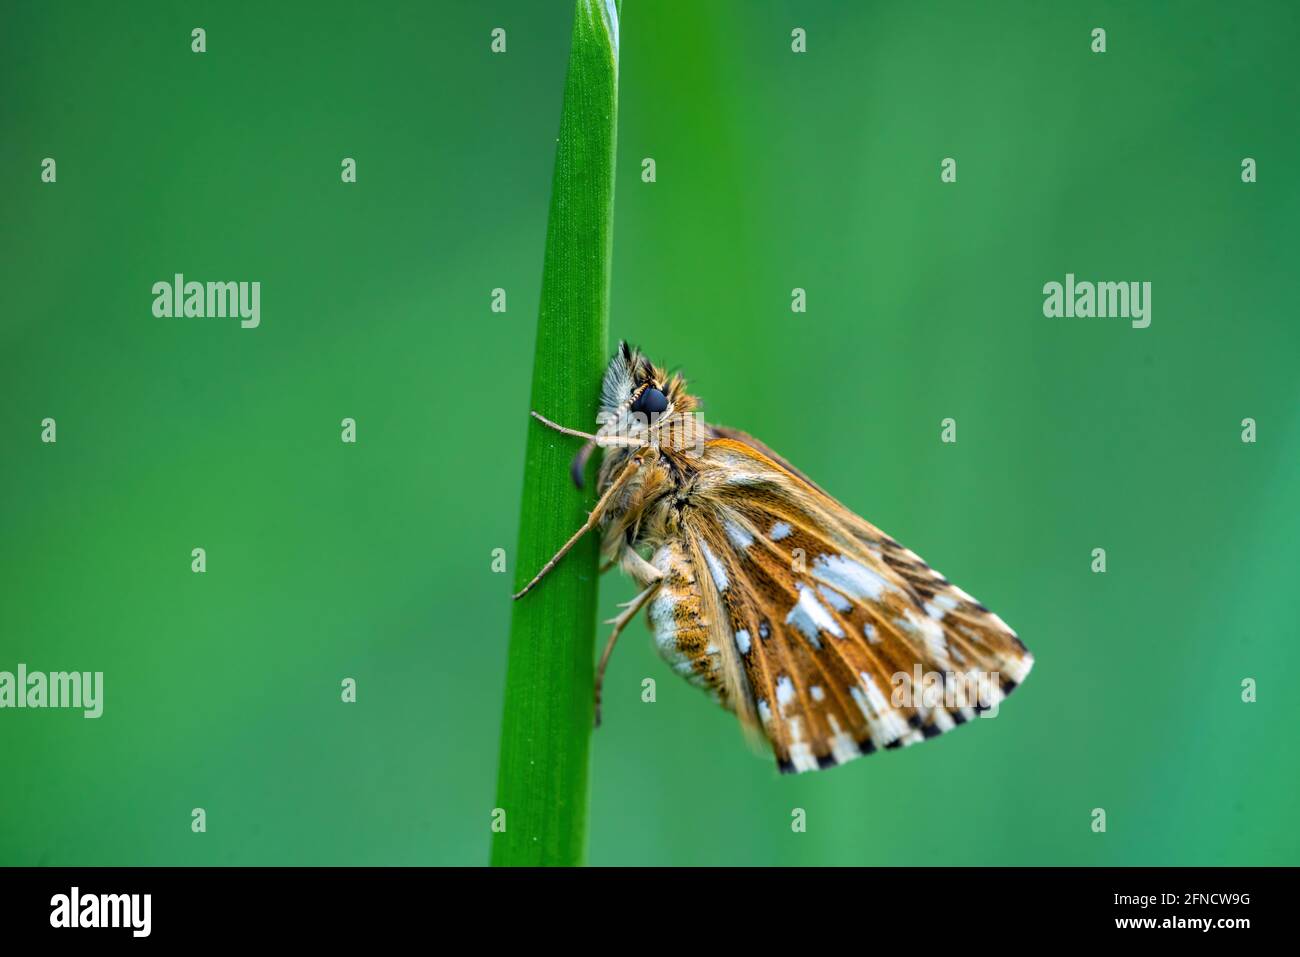 Macro shot of sleeping butterfly with spotted orange and white wings perched on strand of grass. Isolated on green background. Shallow depth of field Stock Photo